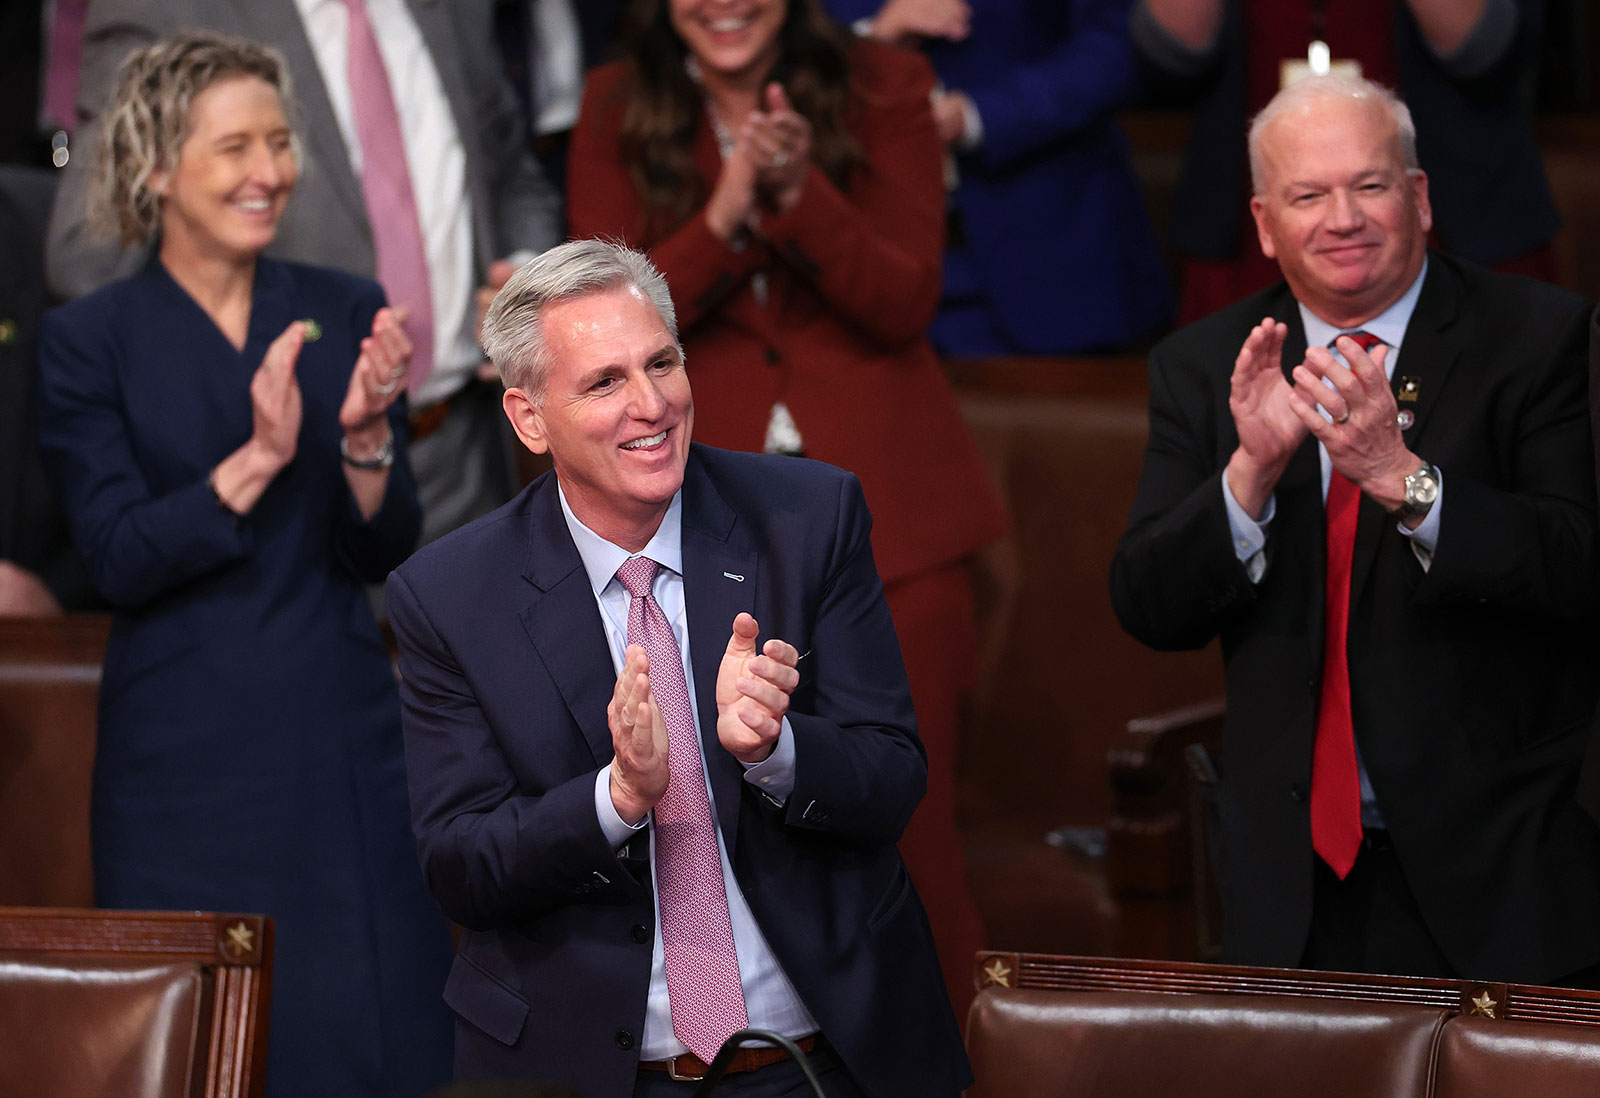 In pictures: McCarthy finds momentum with some flipped votes